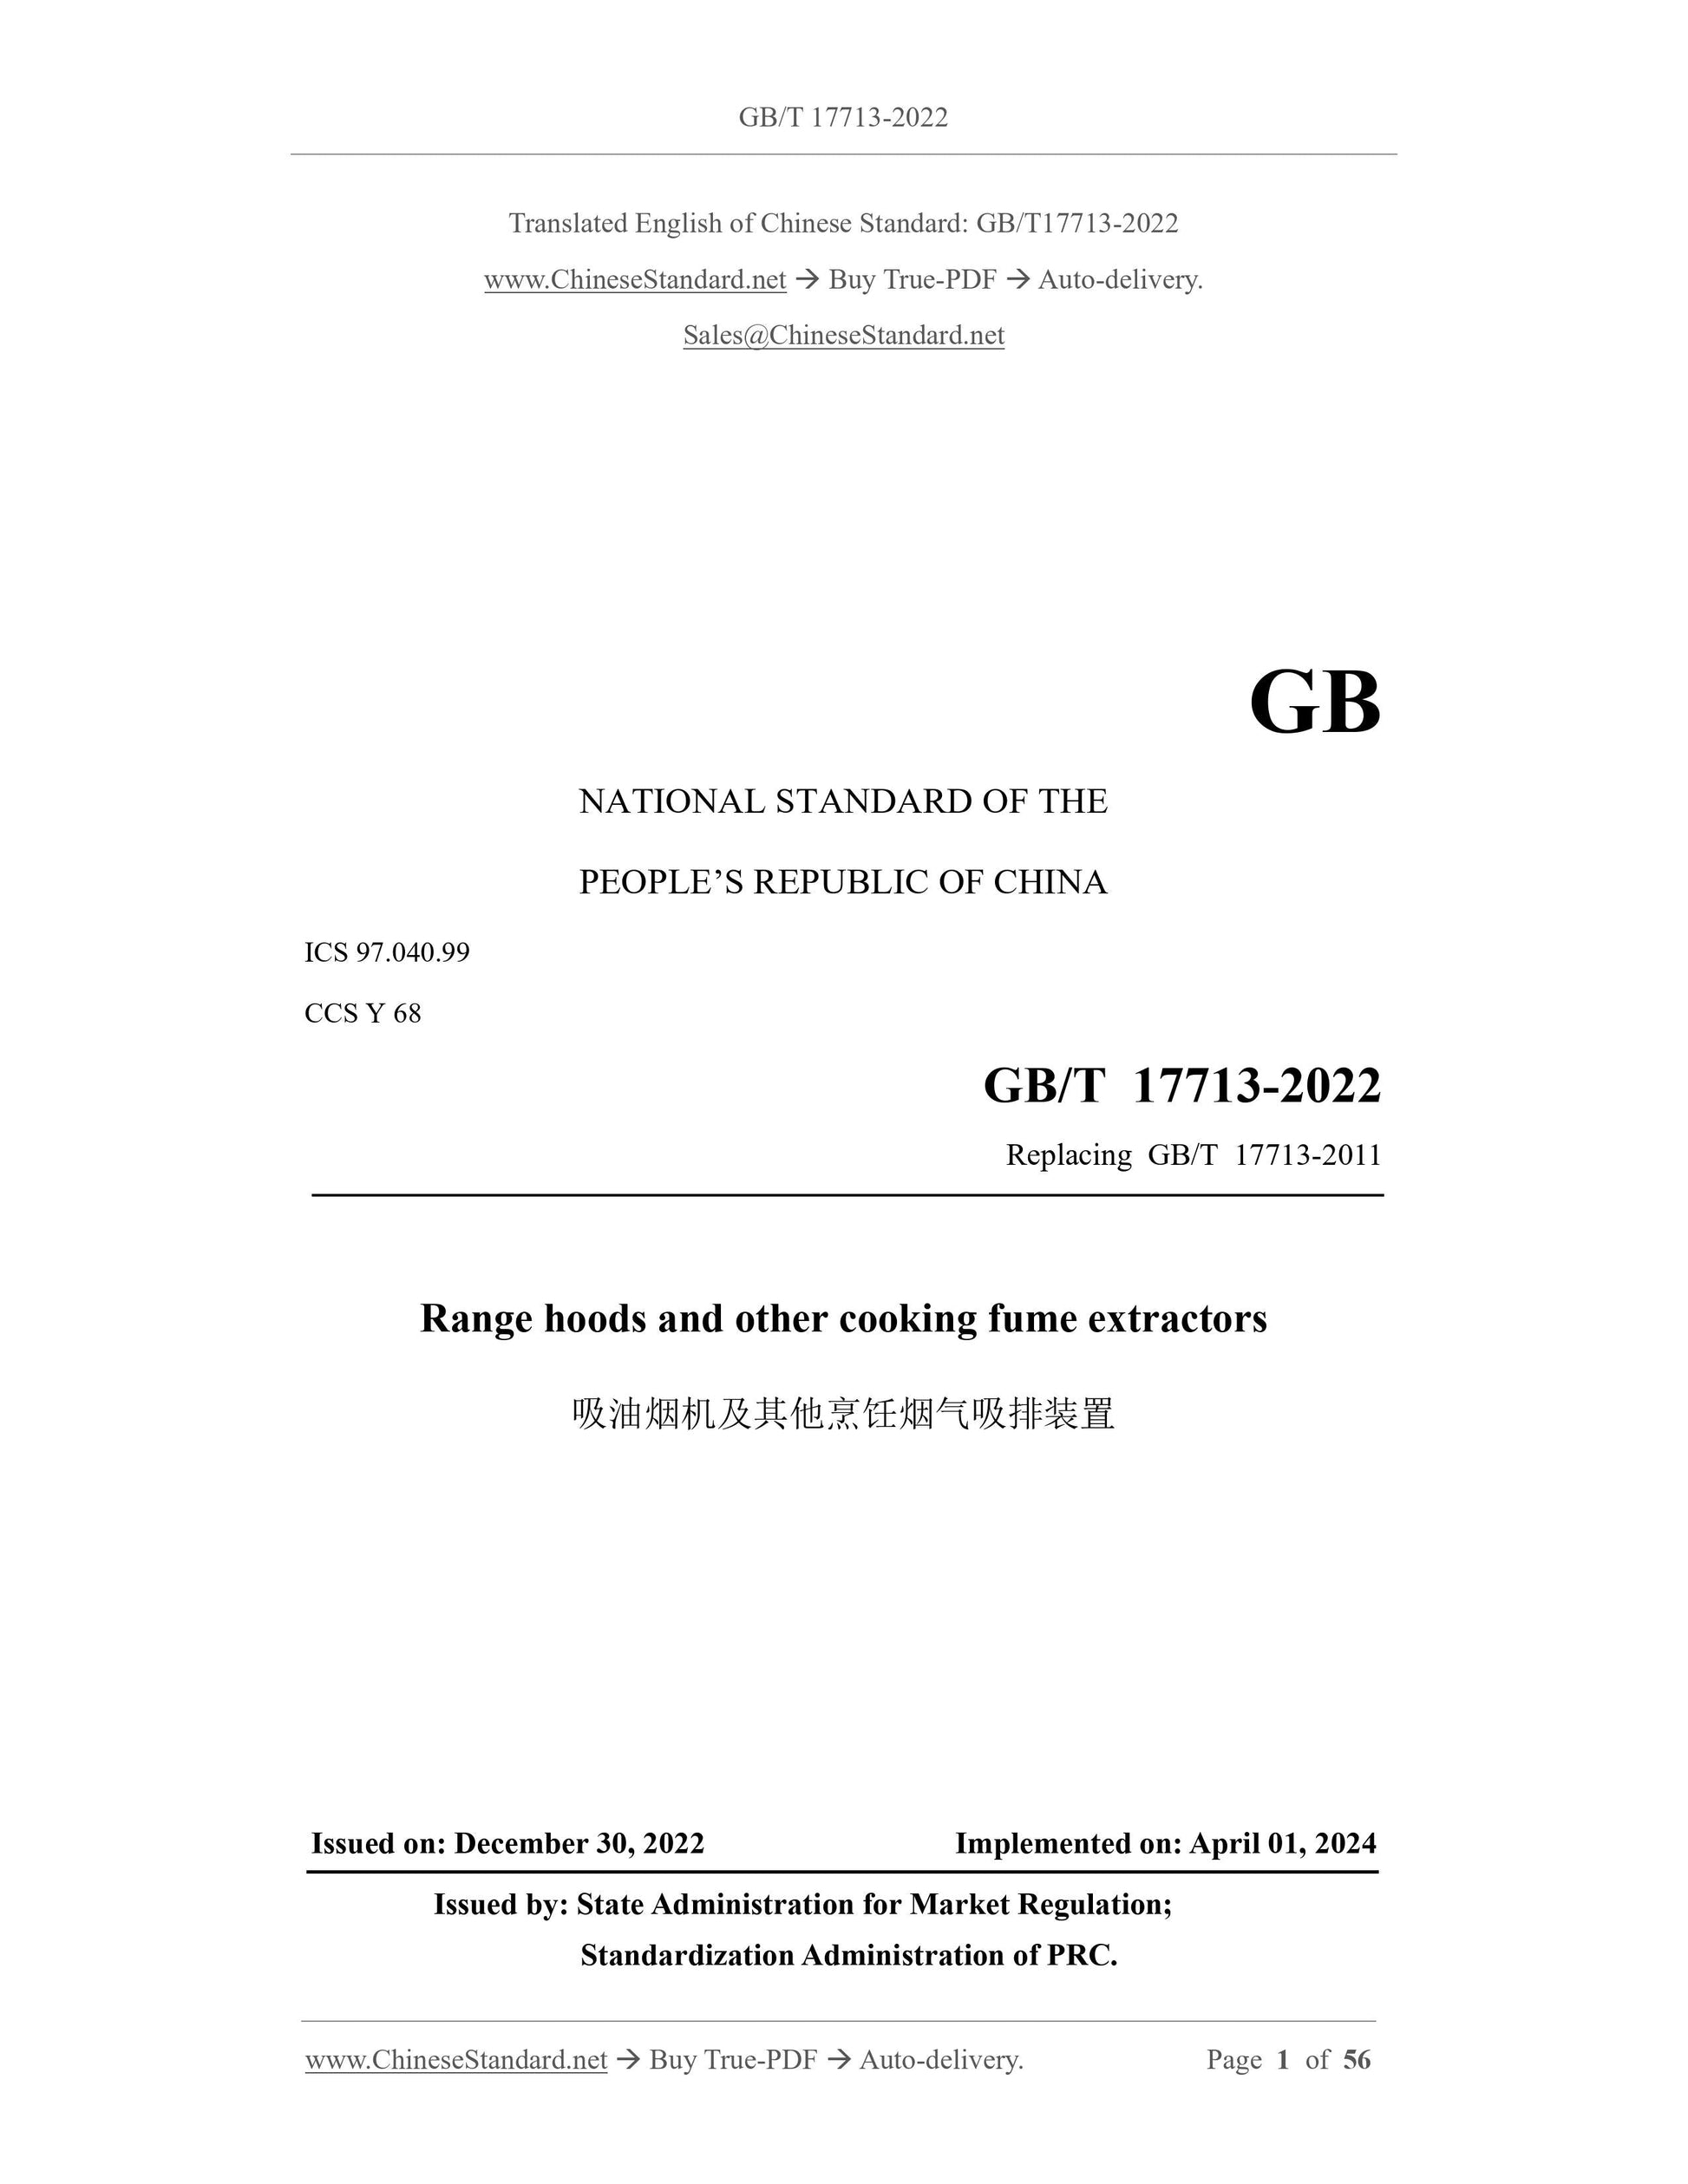 GB/T 17713-2022 Page 1